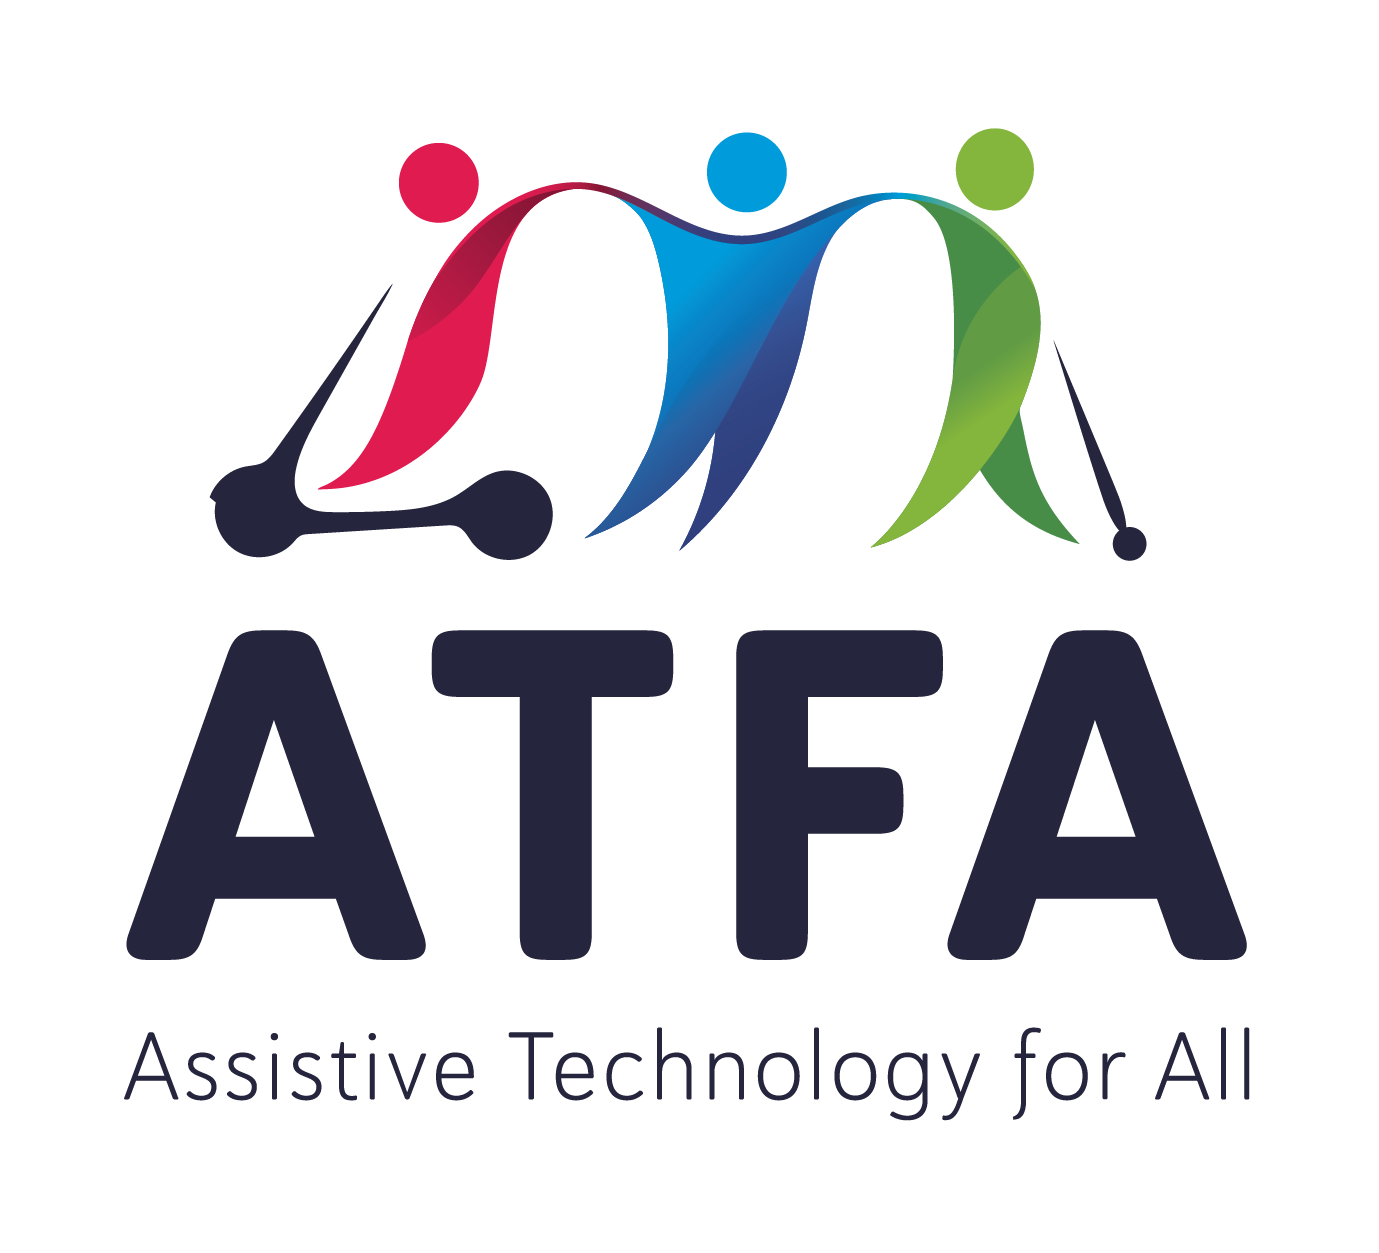 Assistive Technology for All, or ATFA, logo. Three interconnected figures, one using a mobility scooter and one using a cane., with ATFA written below.